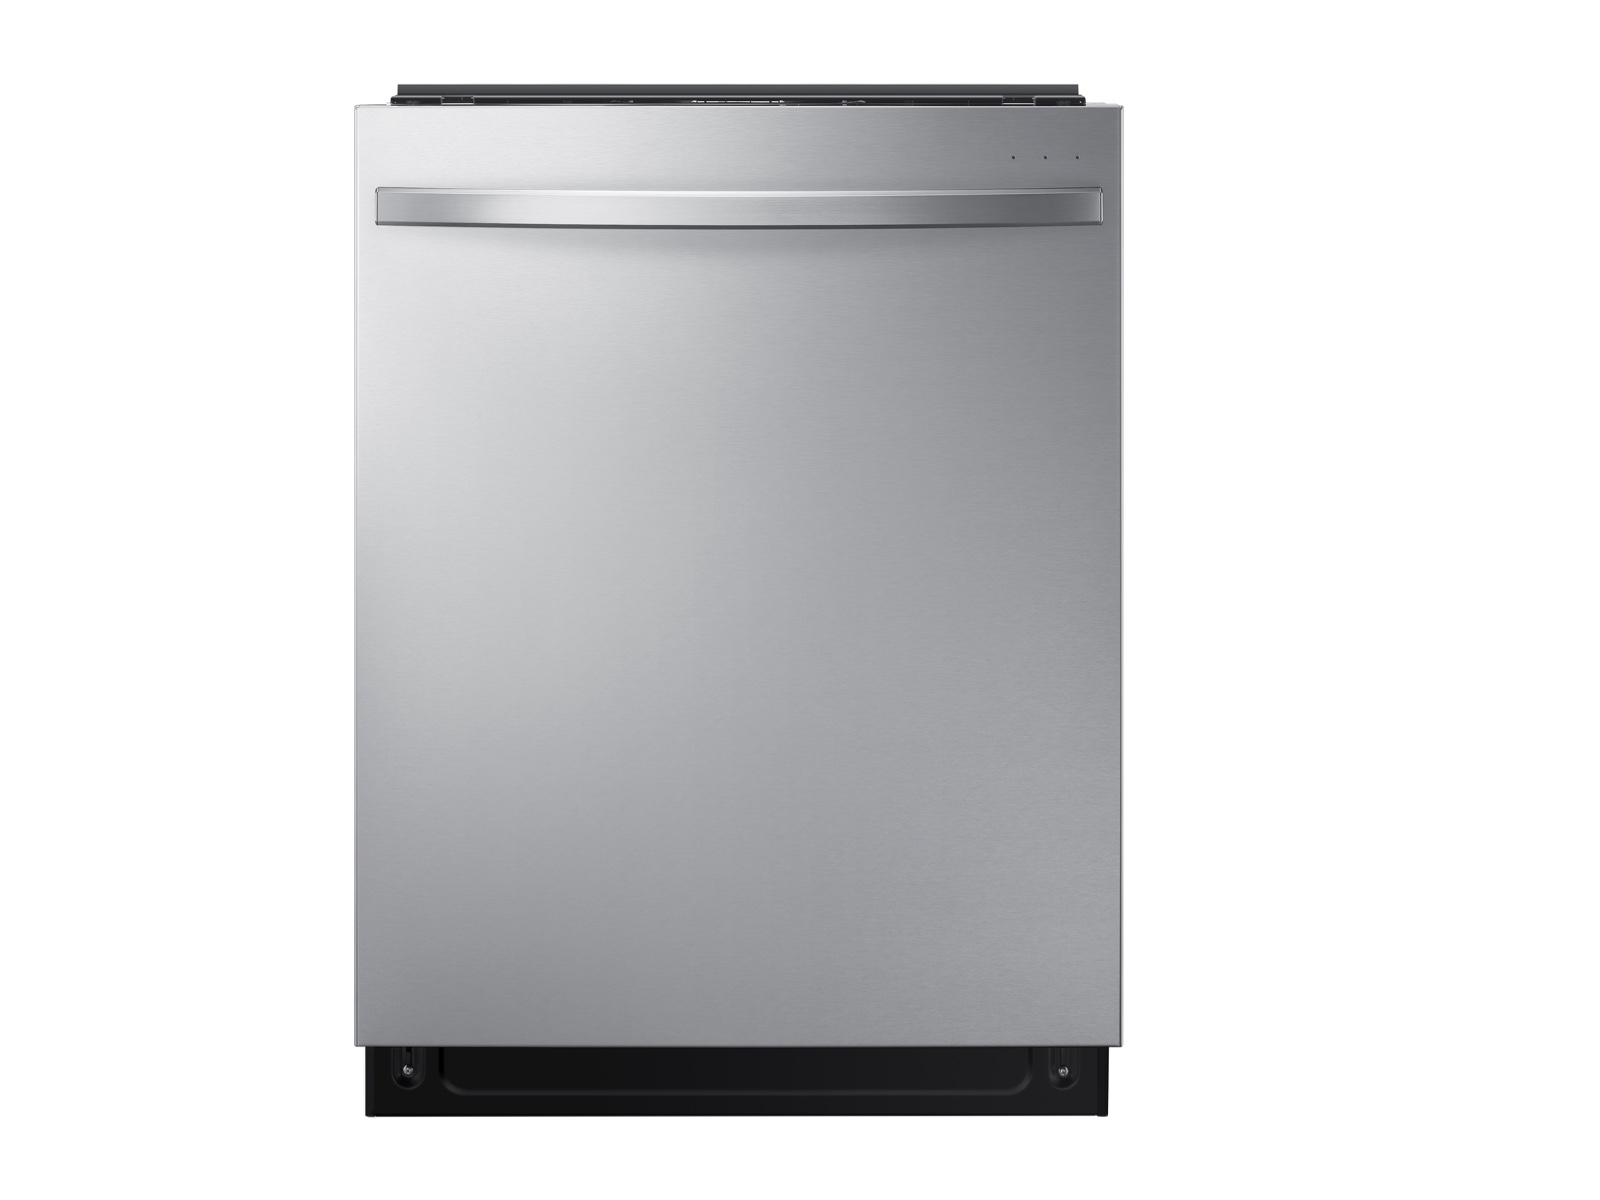 highest rated dishwashers stainless steel